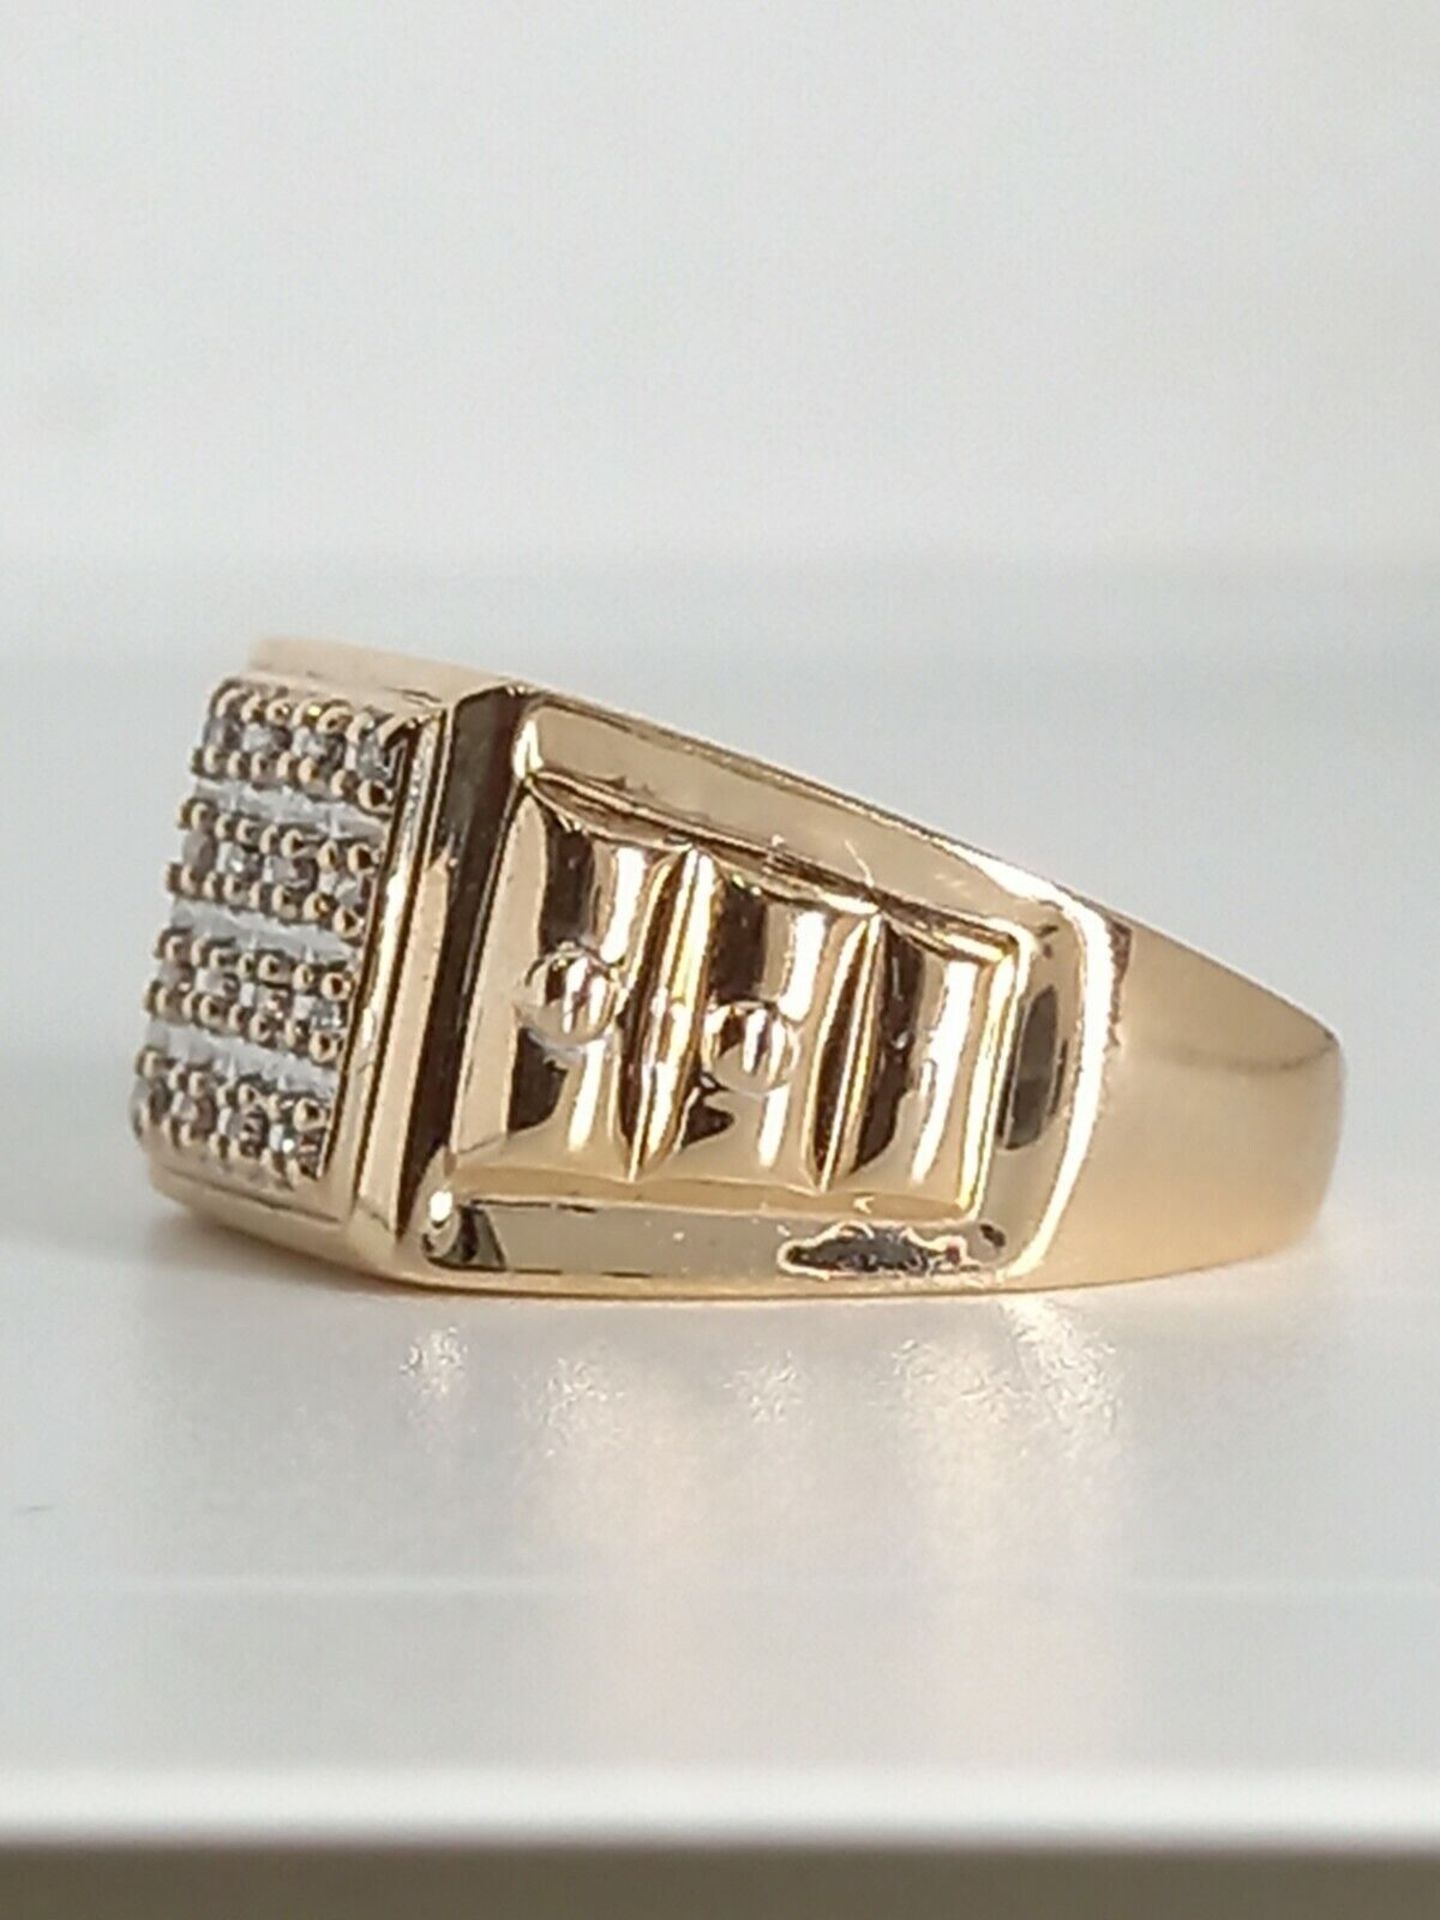 SIGNET RING FEATURES 16 DIAMONDS IN A LUX PAVE SETTING, ENCLAVED IN 9CT YELLOW GOLD - Image 2 of 5